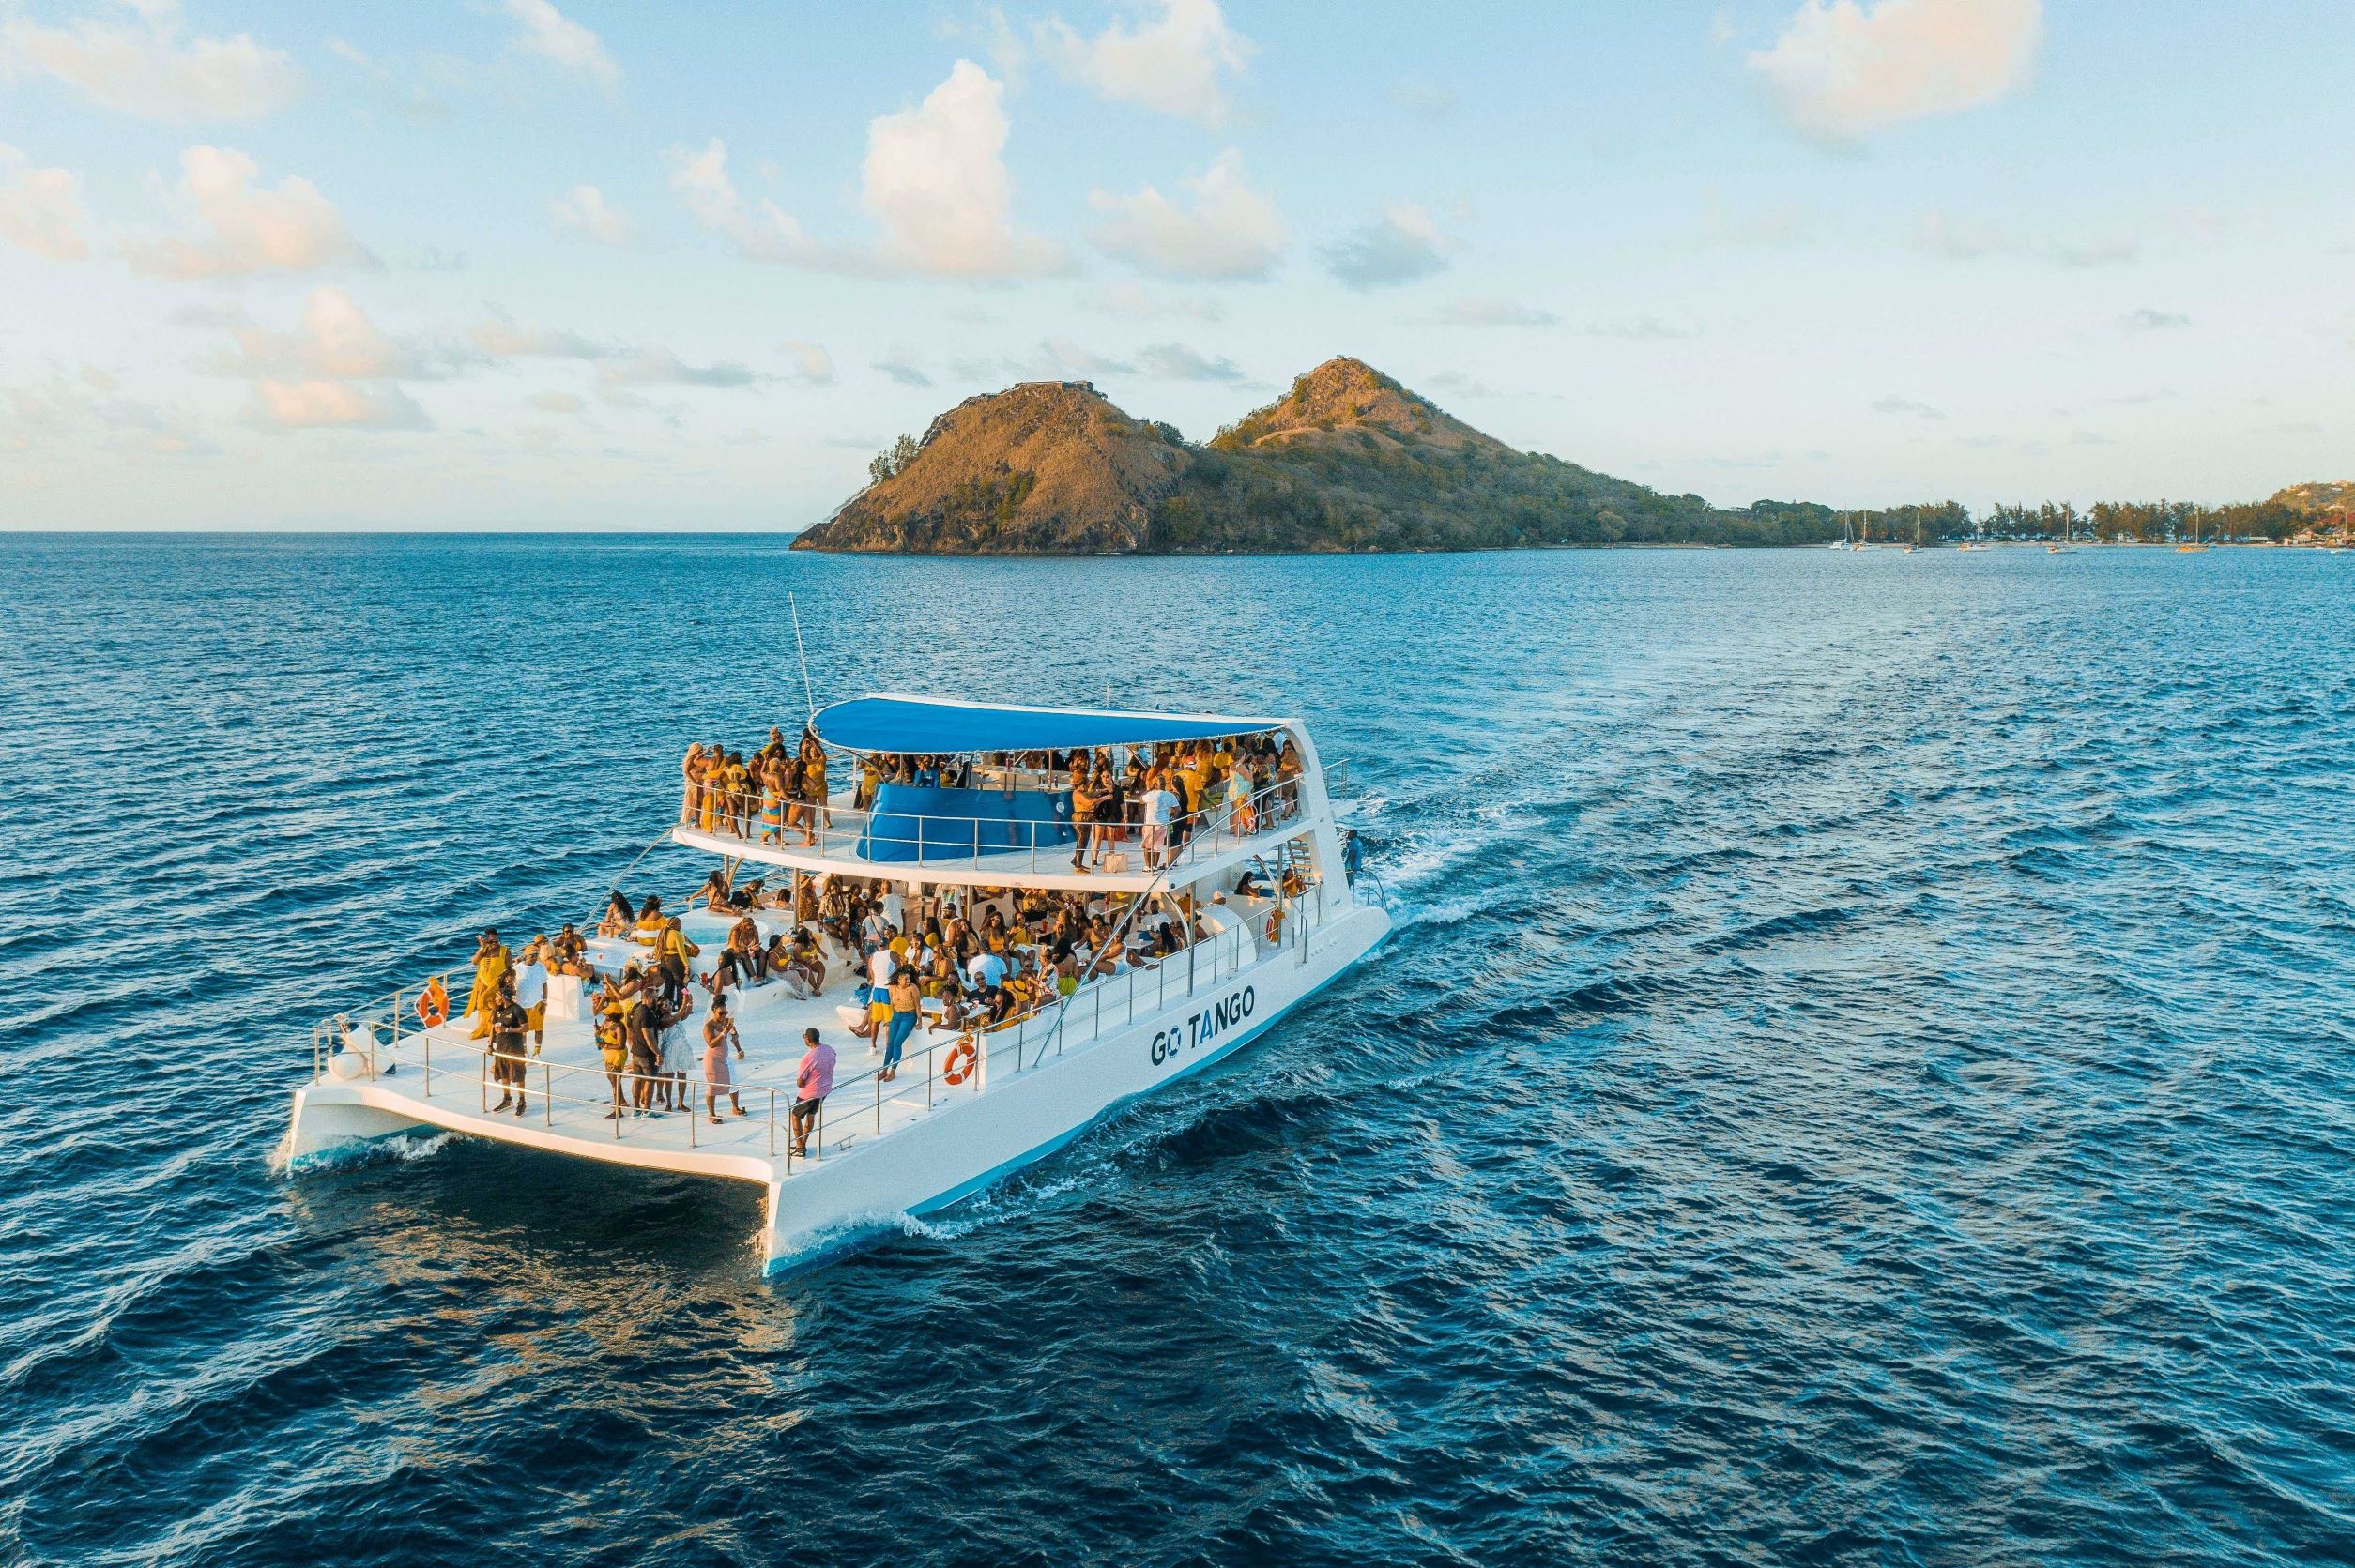 How to organize a boat party?